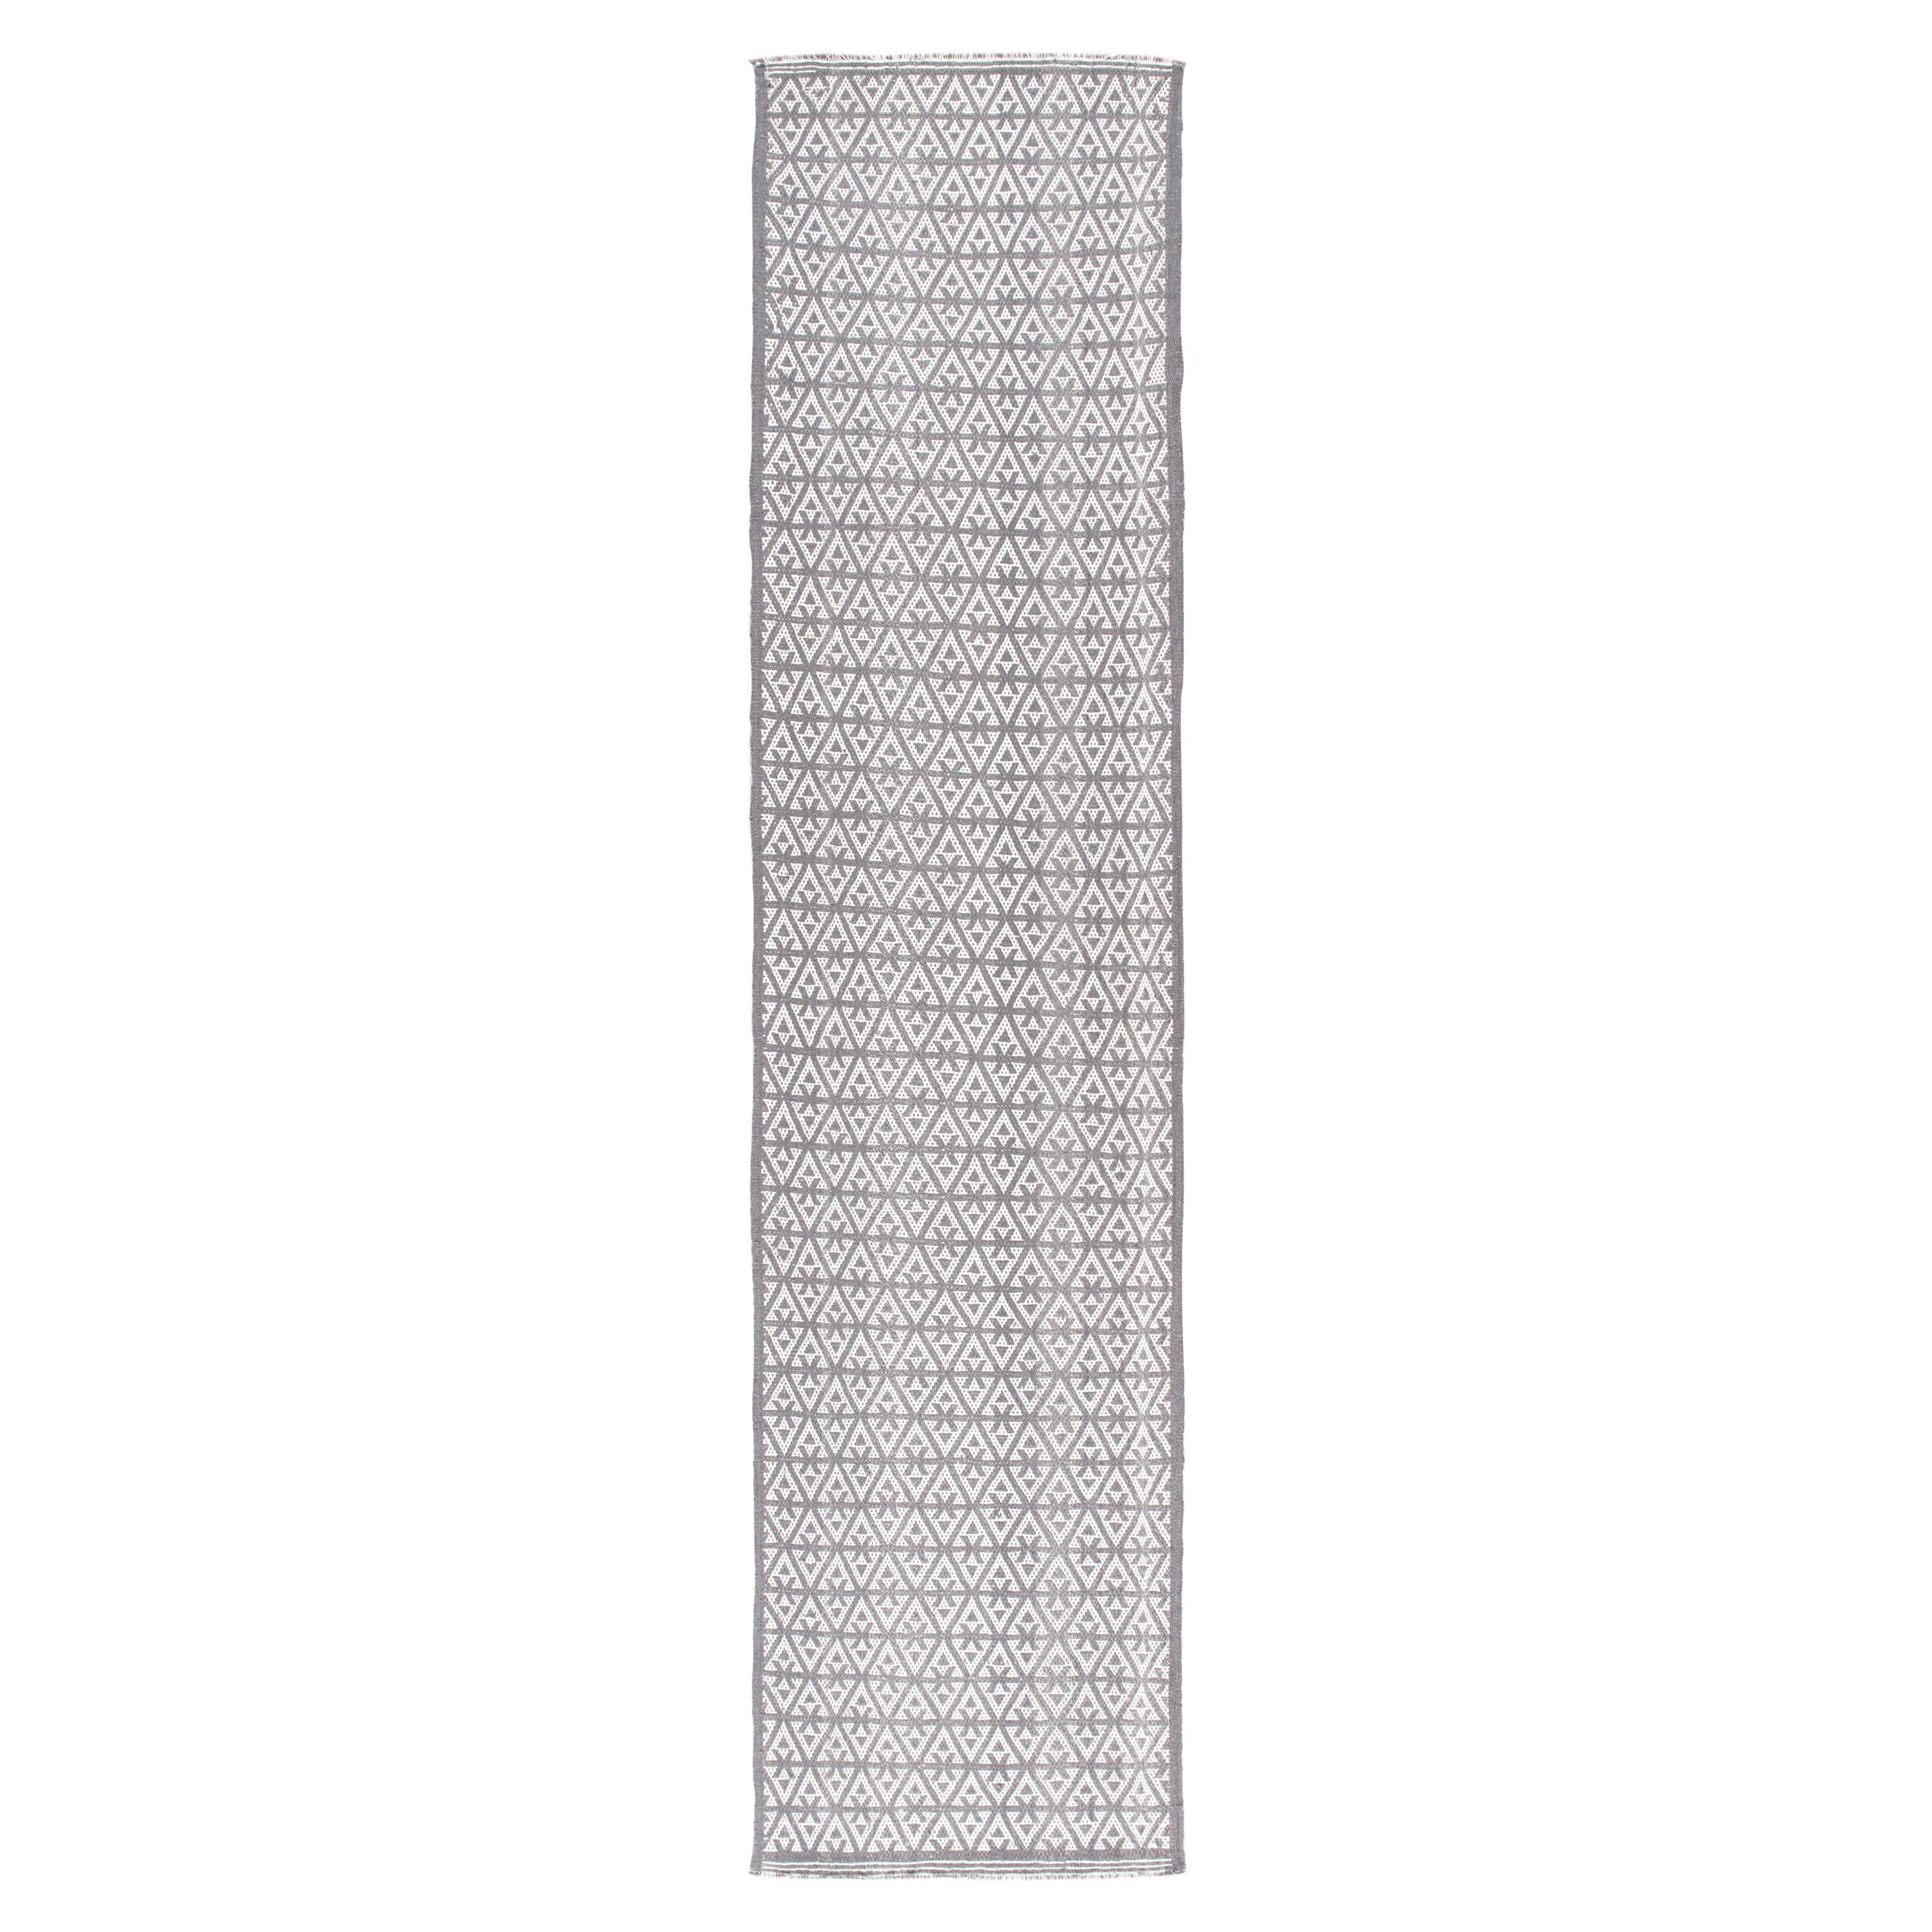 Decorative Handwoven Flat-Weave Runner Rug in Grey and Ivory Color For Sale